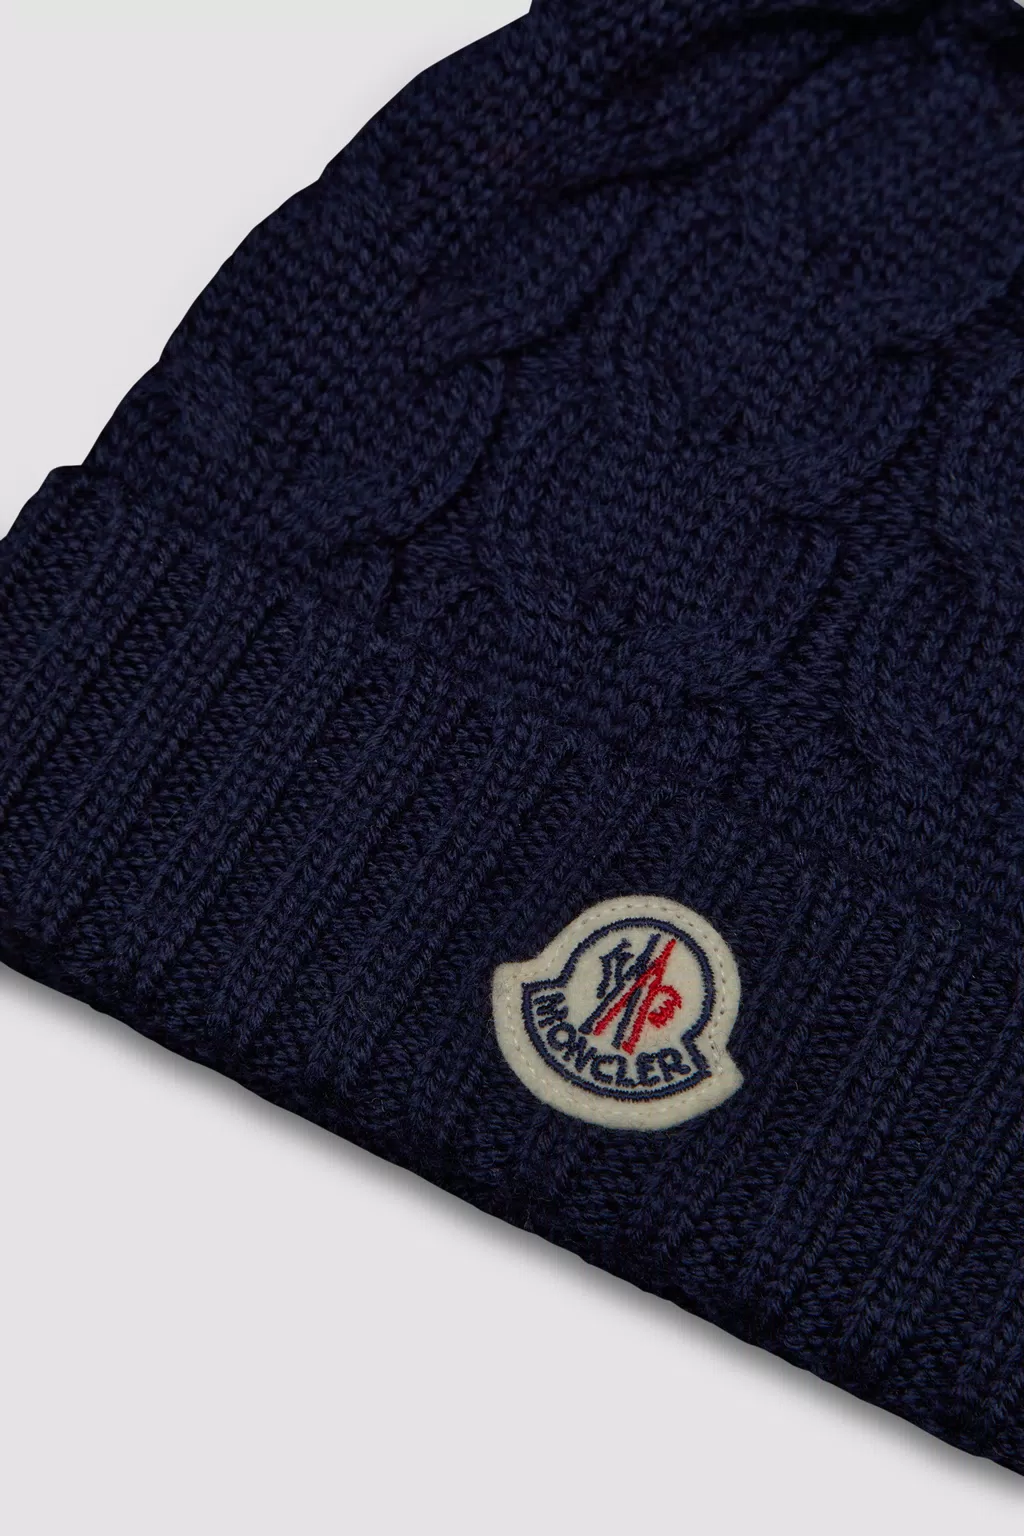 Gifts Kids and Babies - Gift Ideas | Moncler US